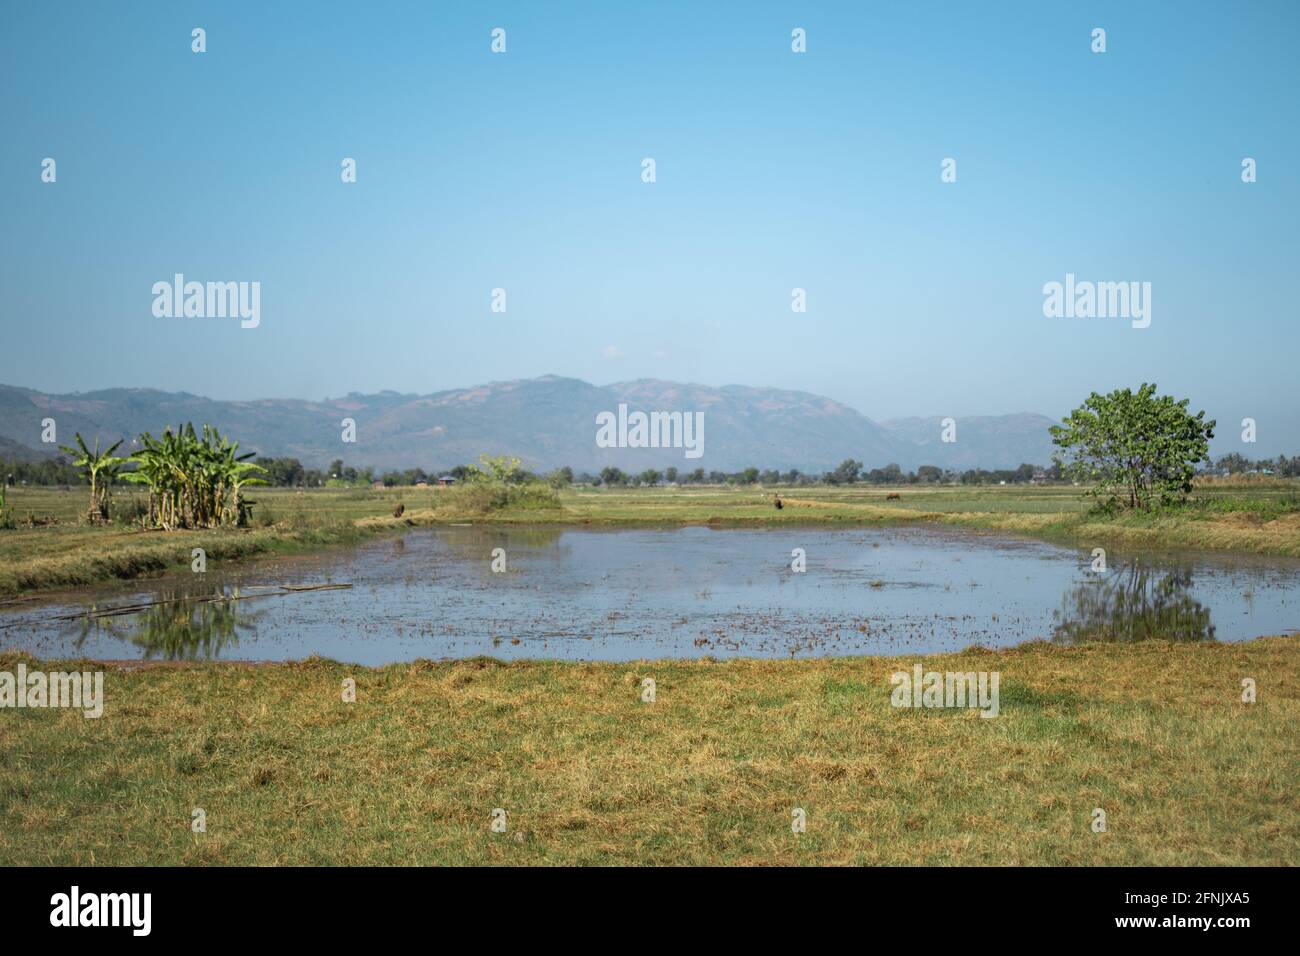 Landscape over a small water pond with mountains in the distance by a farm village near Inle Lake, Nyaung Shwe, Shan state, Myanmar Stock Photo